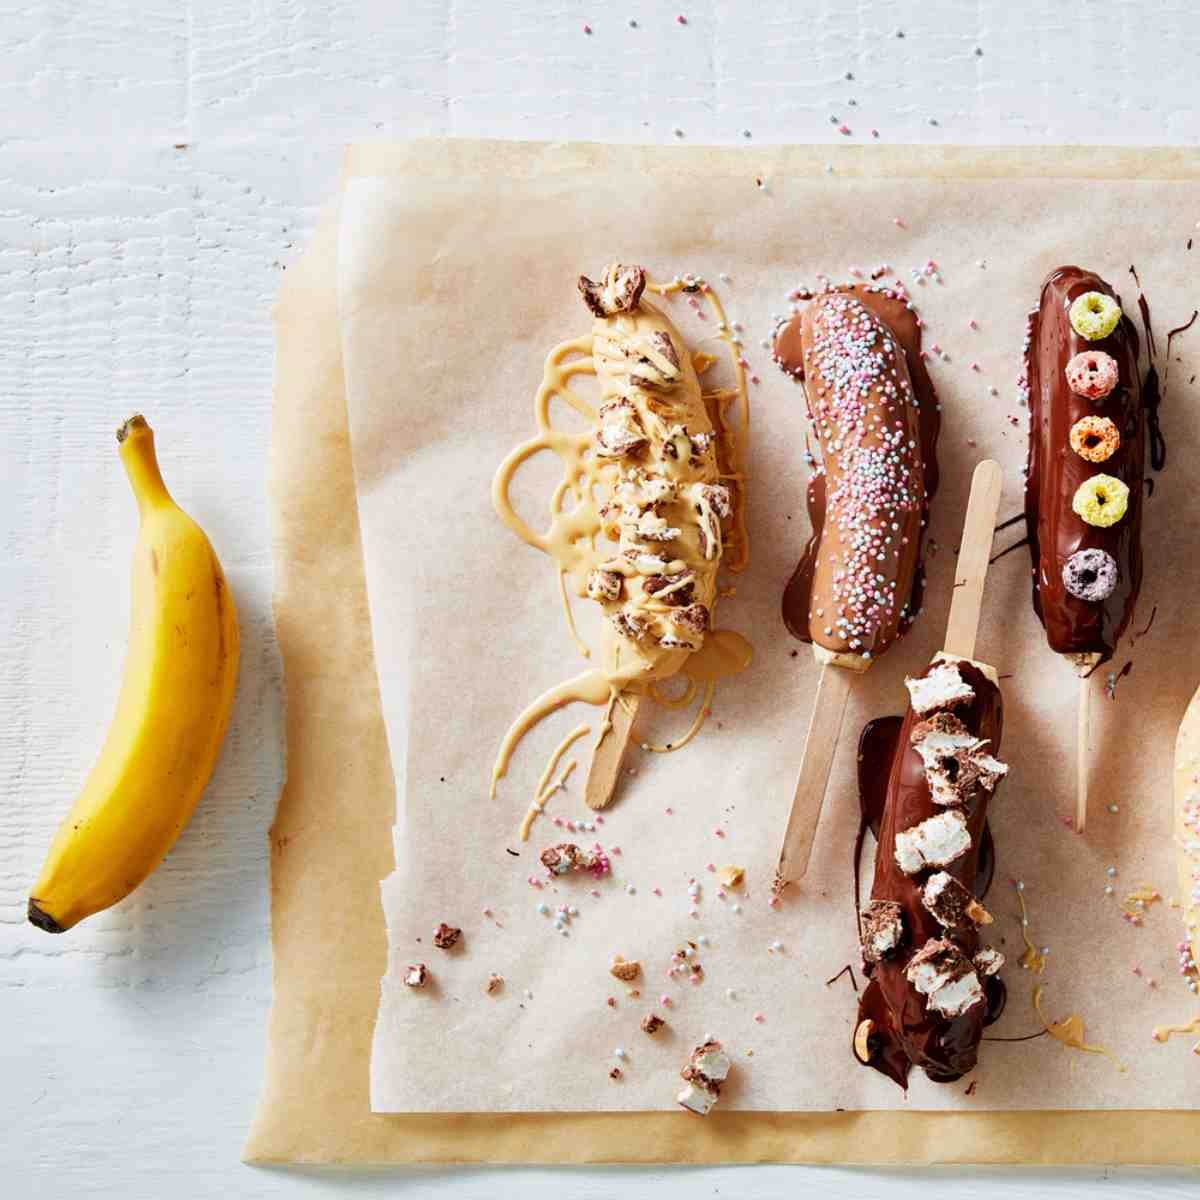 Little Gem banana pops coated with chocolate and candy on baking paper, with a banana next to them.